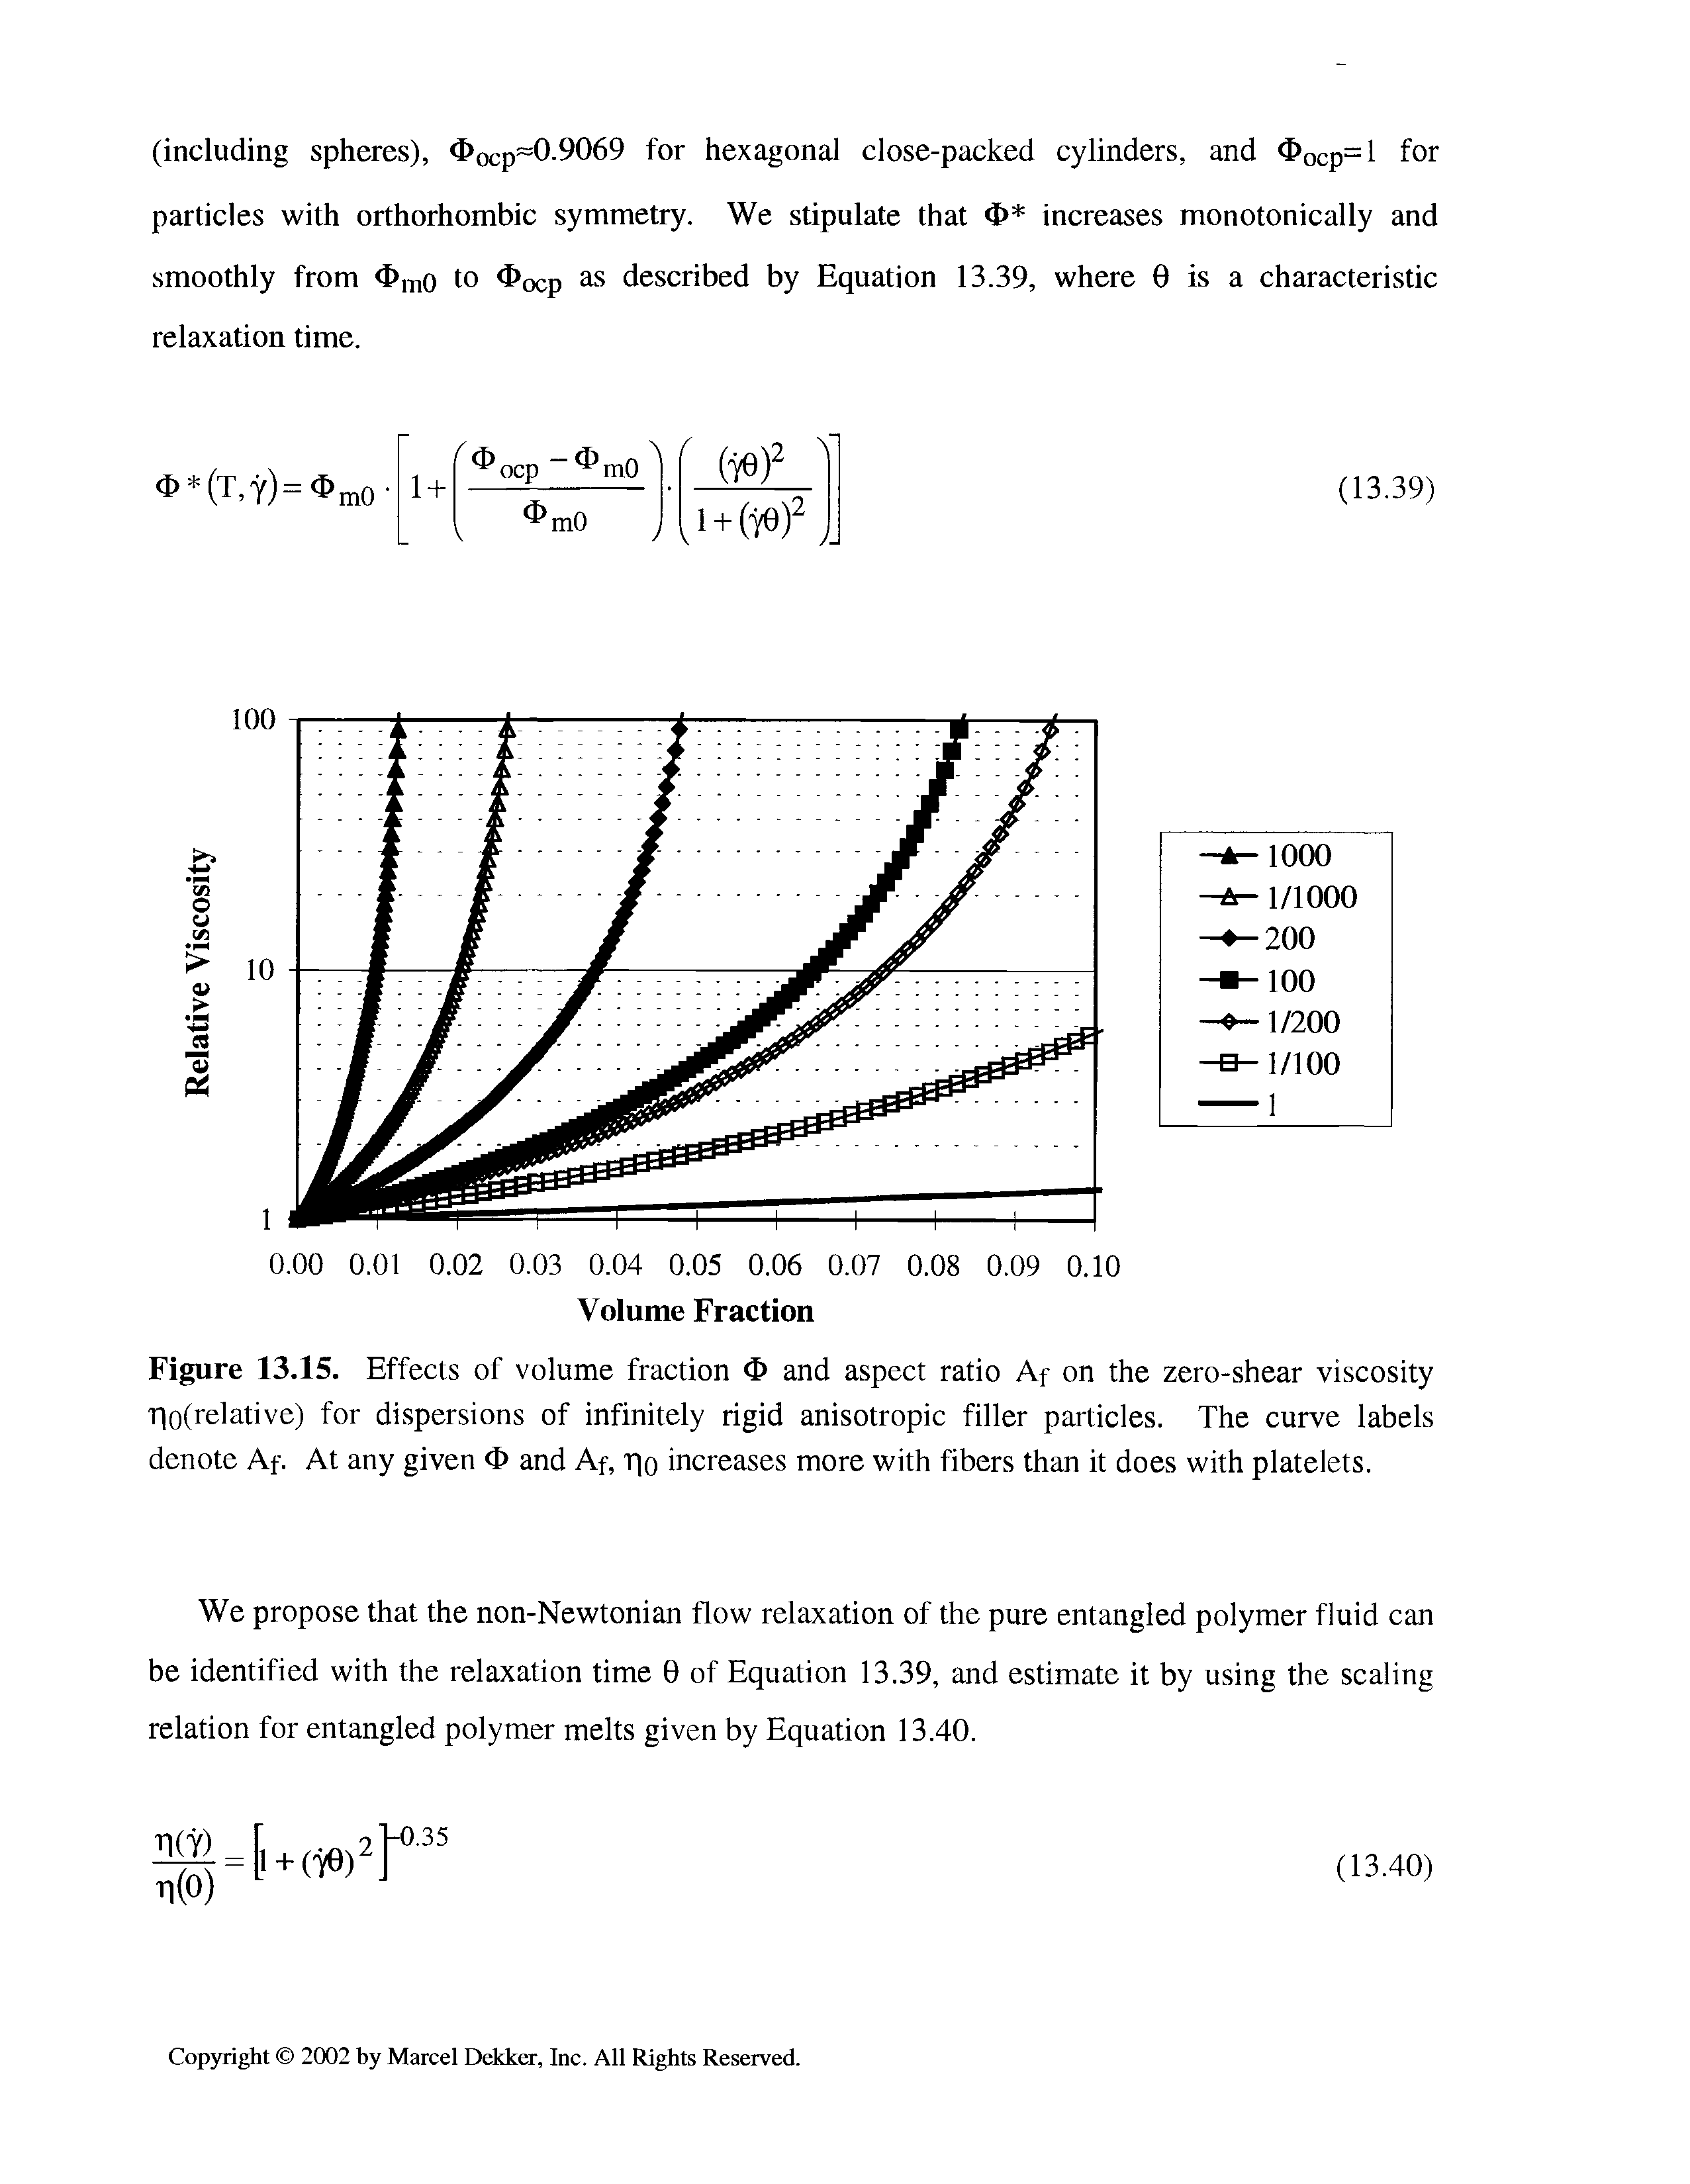 Figure 13.15. Effects of volume fraction O and aspect ratio Af on the zero-shear viscosity rio(relative) for dispersions of infinitely rigid anisotropic filler particles. The curve labels denote Af. At any given d> and Af, T)o increases more with fibers than it does with platelets.